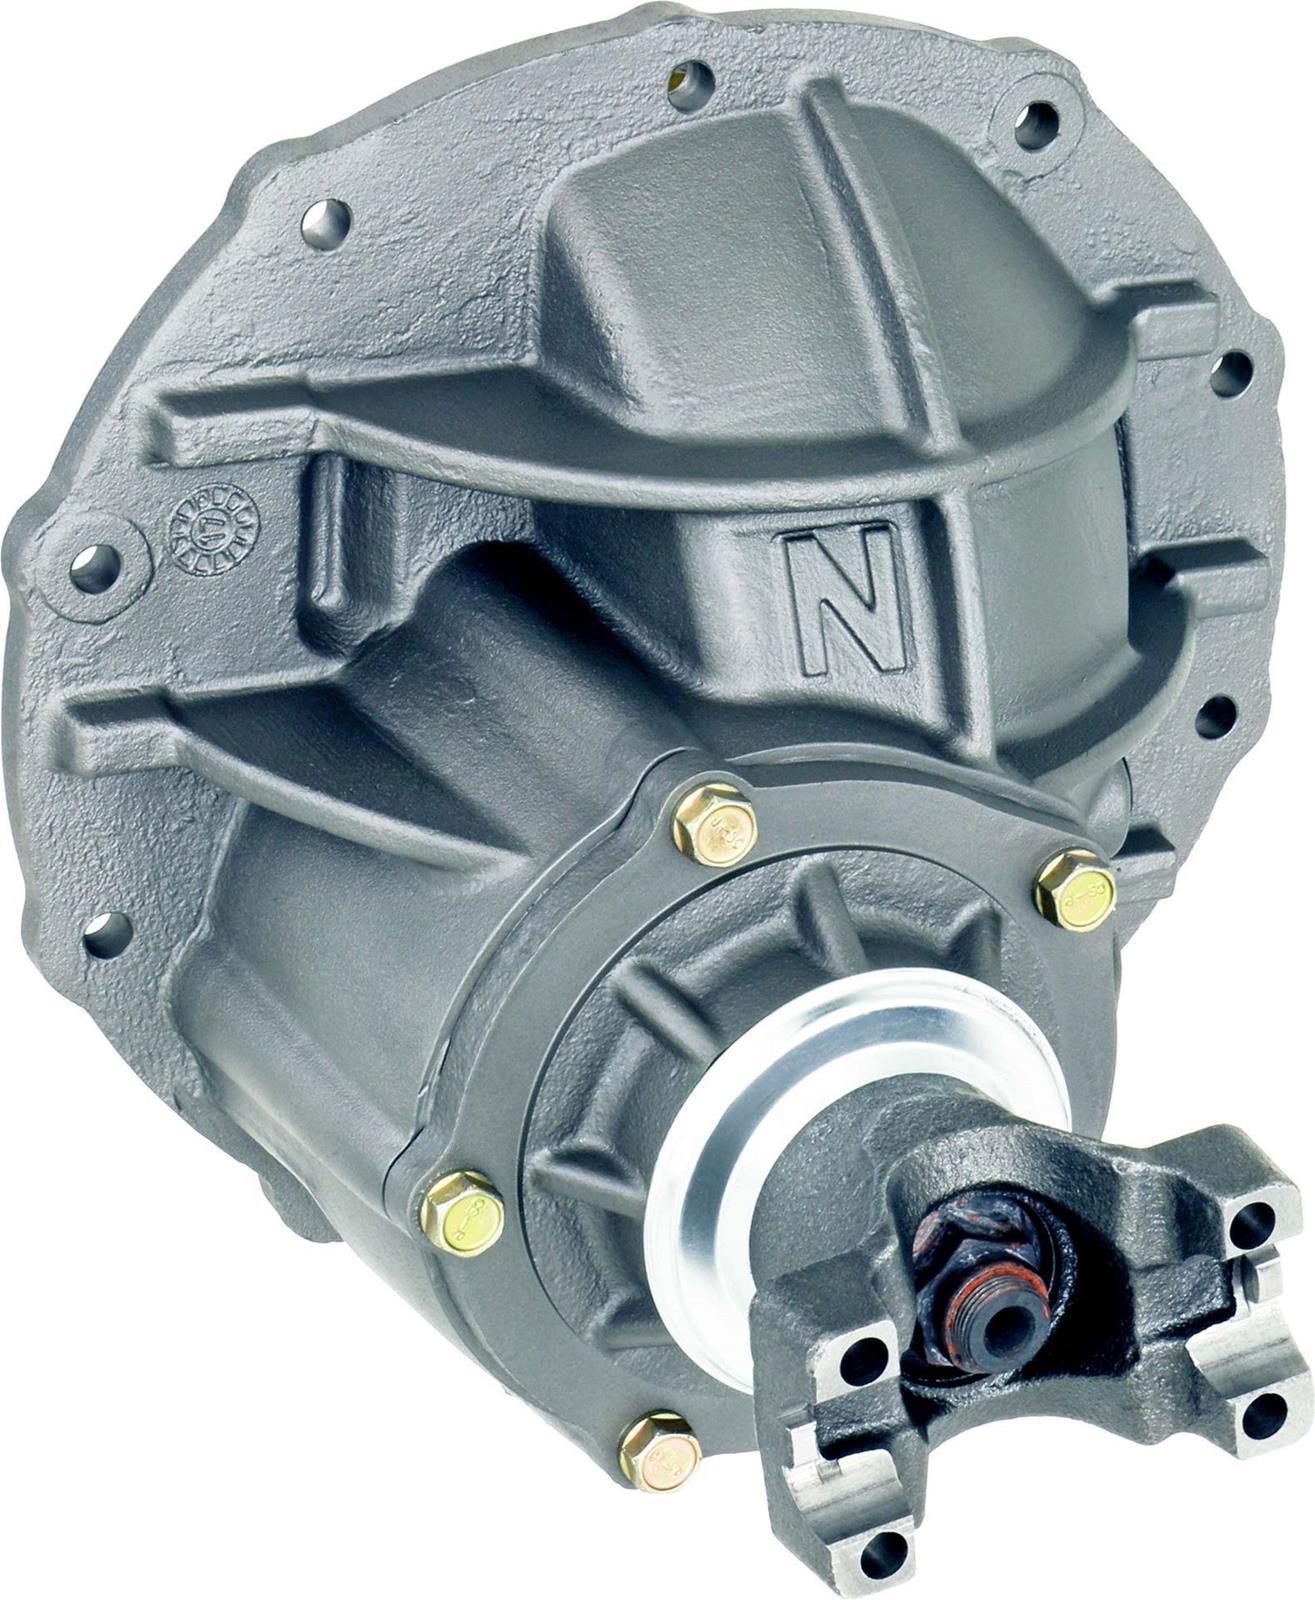 Currie CE-9CT389S Differential Carrier, 3.890 Ratio, 31 Spline, Nodular Iron, Natural, Ford 9 in, Each